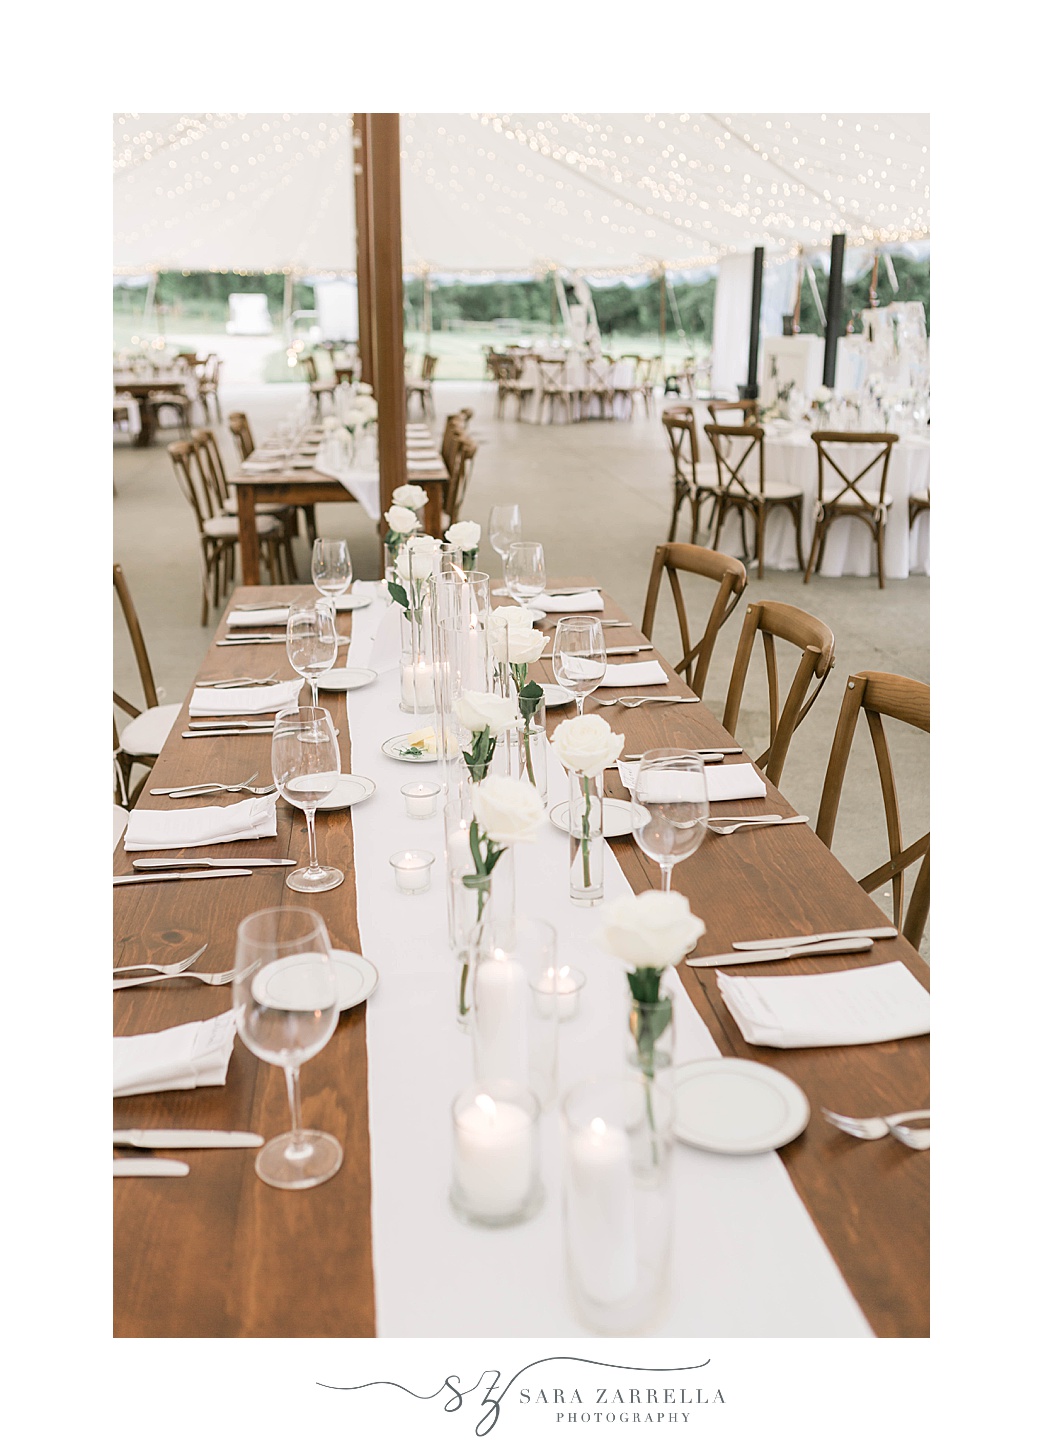 wedding reception with white table runner onwoodne table 